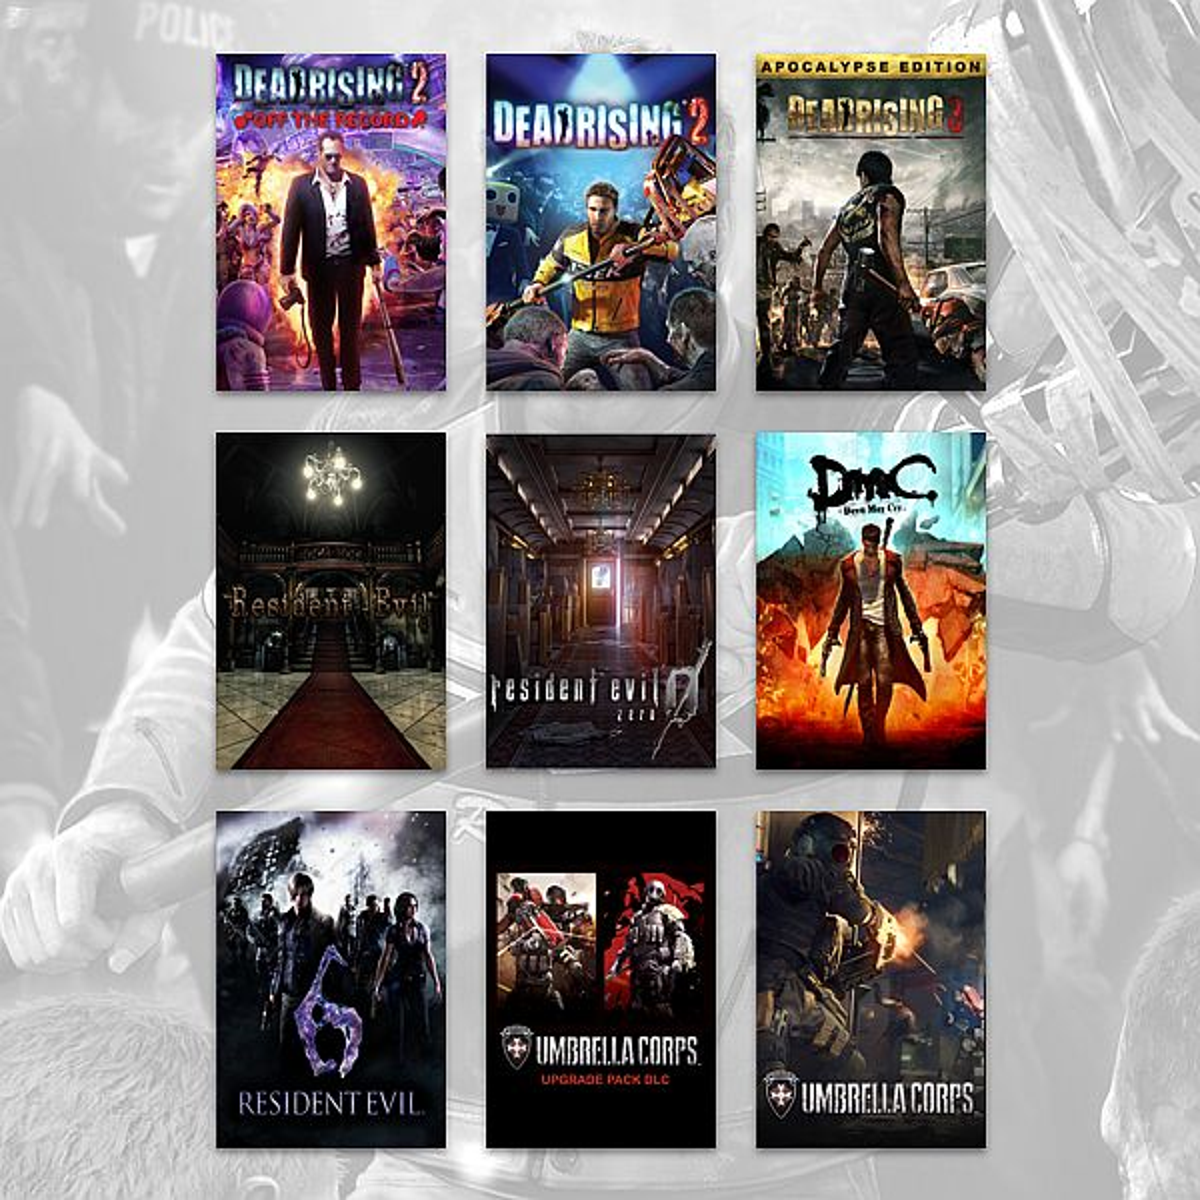 Humble Bundle Charity Launches Huge Resident Evil Deal!